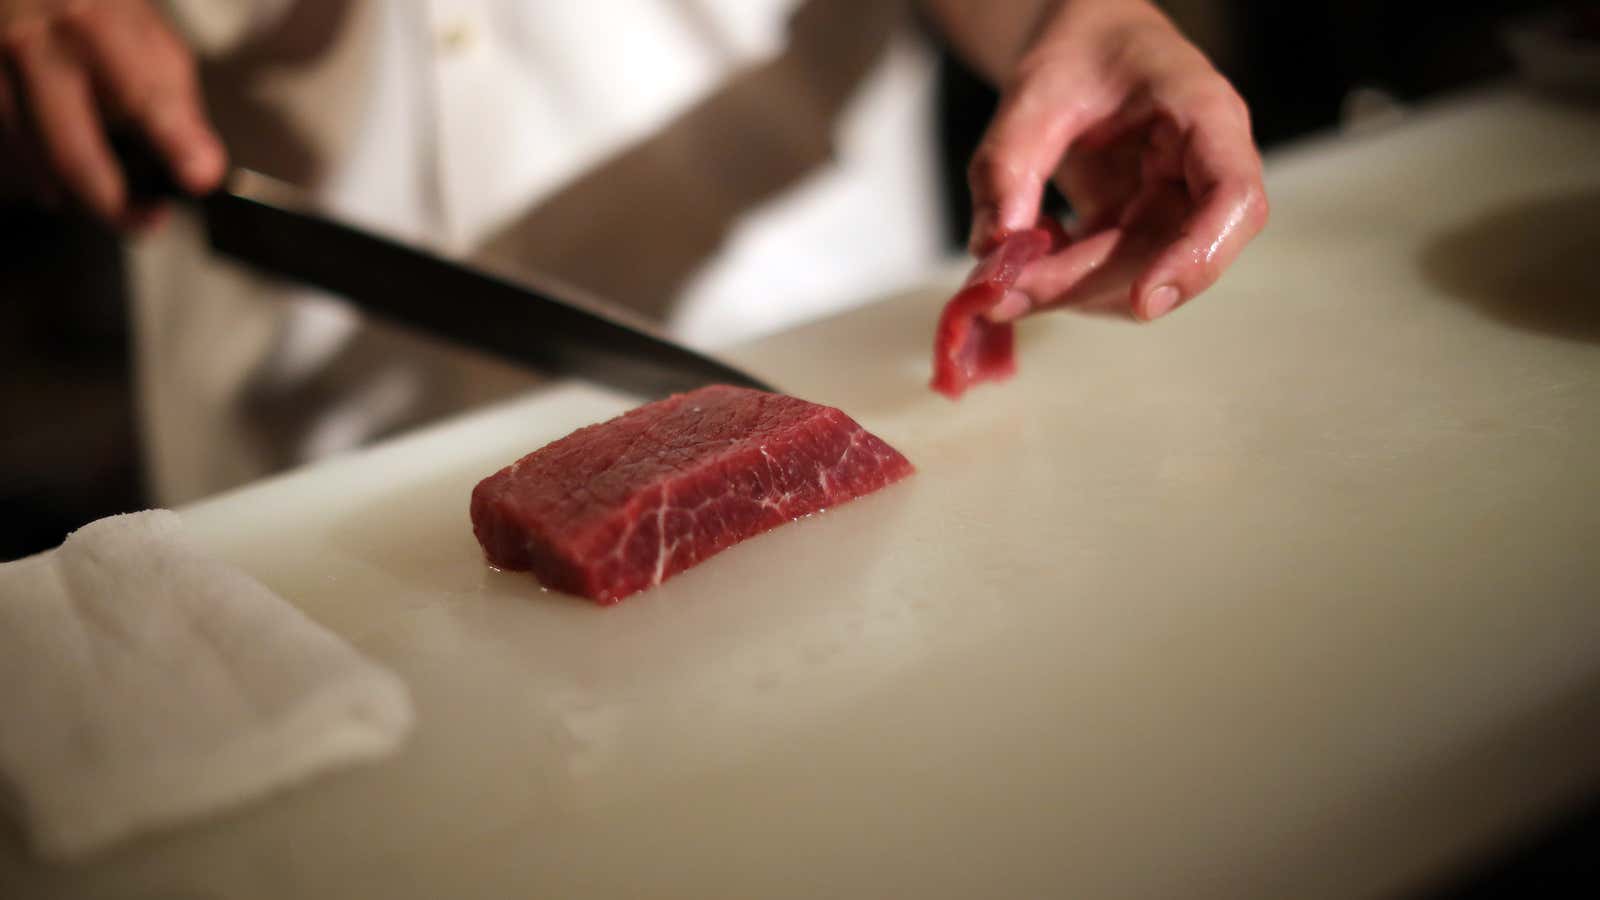 Should lab-grown meat be called meat?